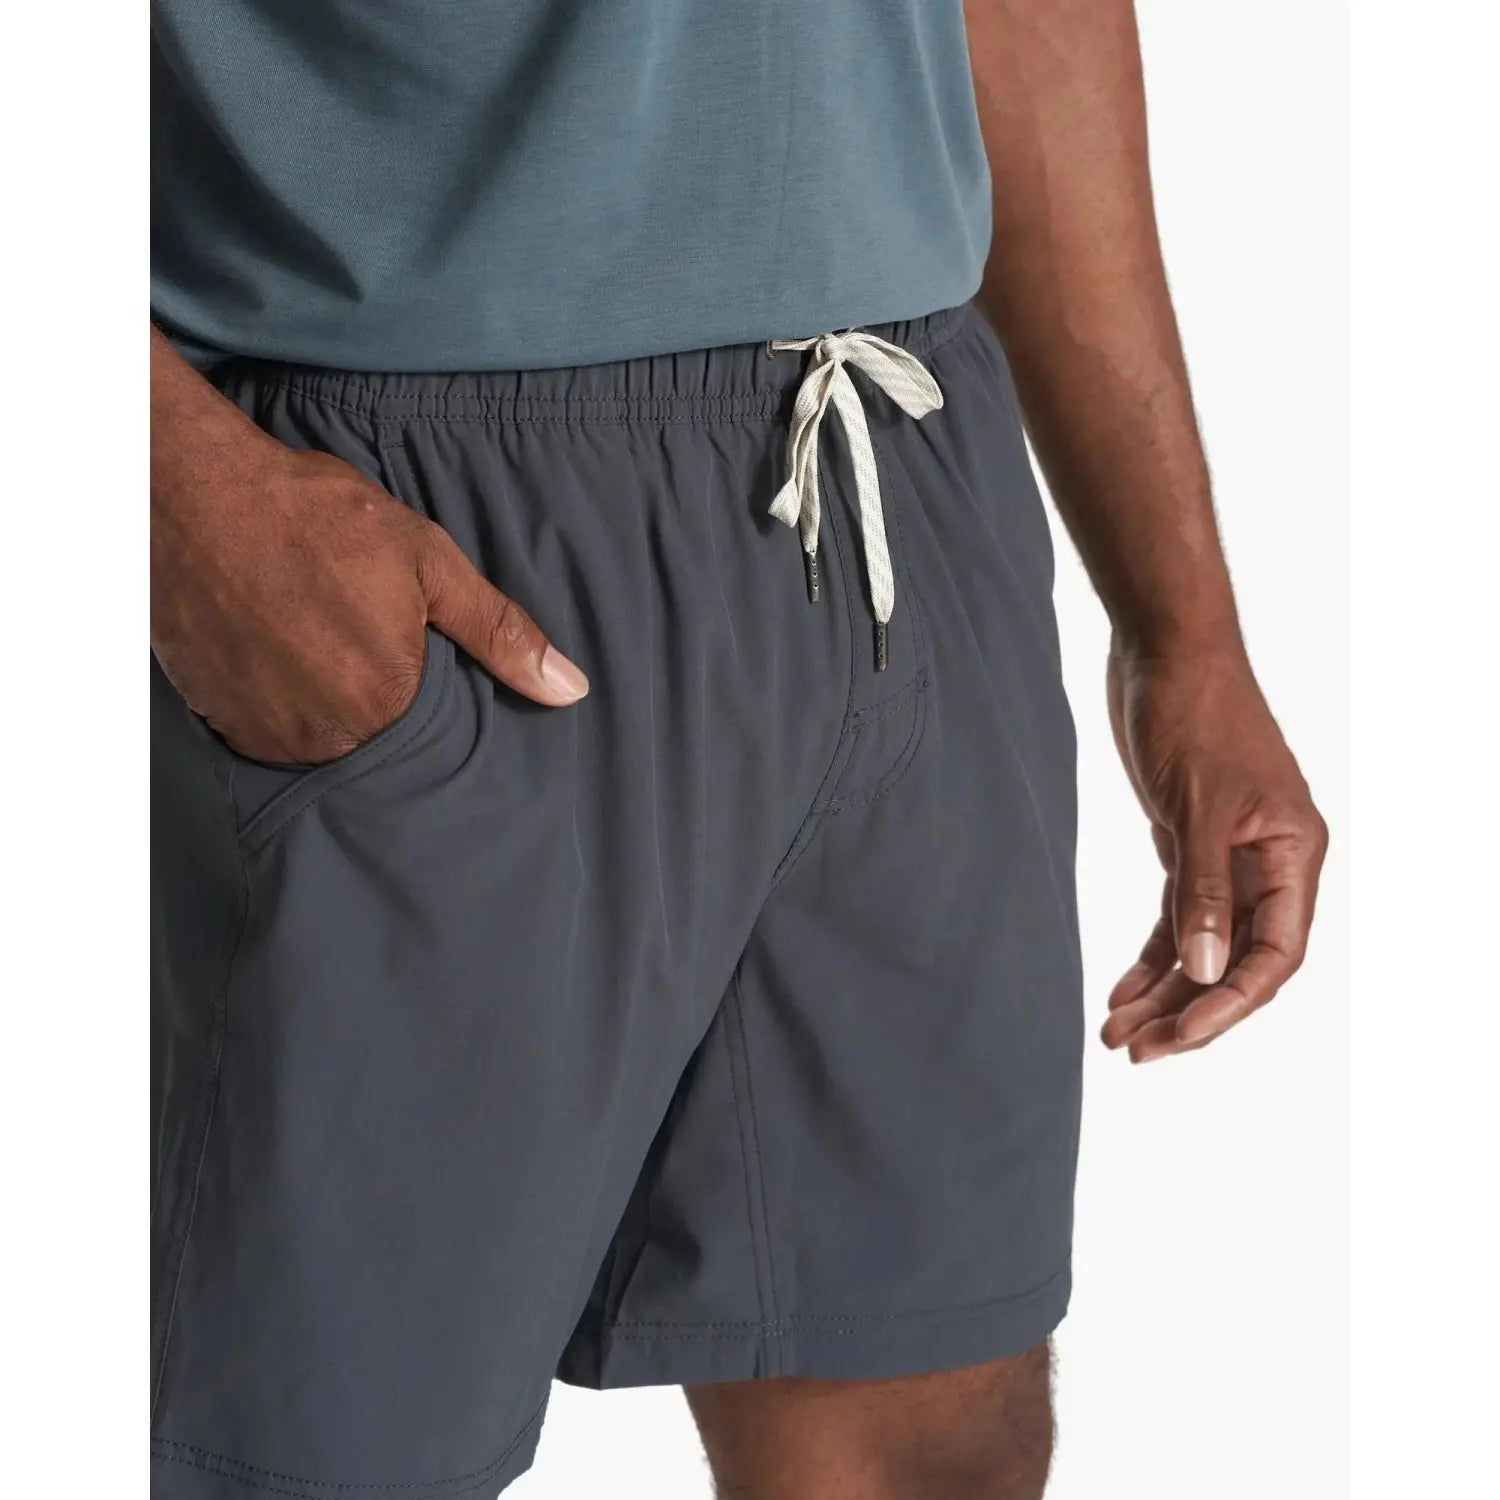 Vuori Men's Kore Short shown in Charcoal on model - front view with white string ties.